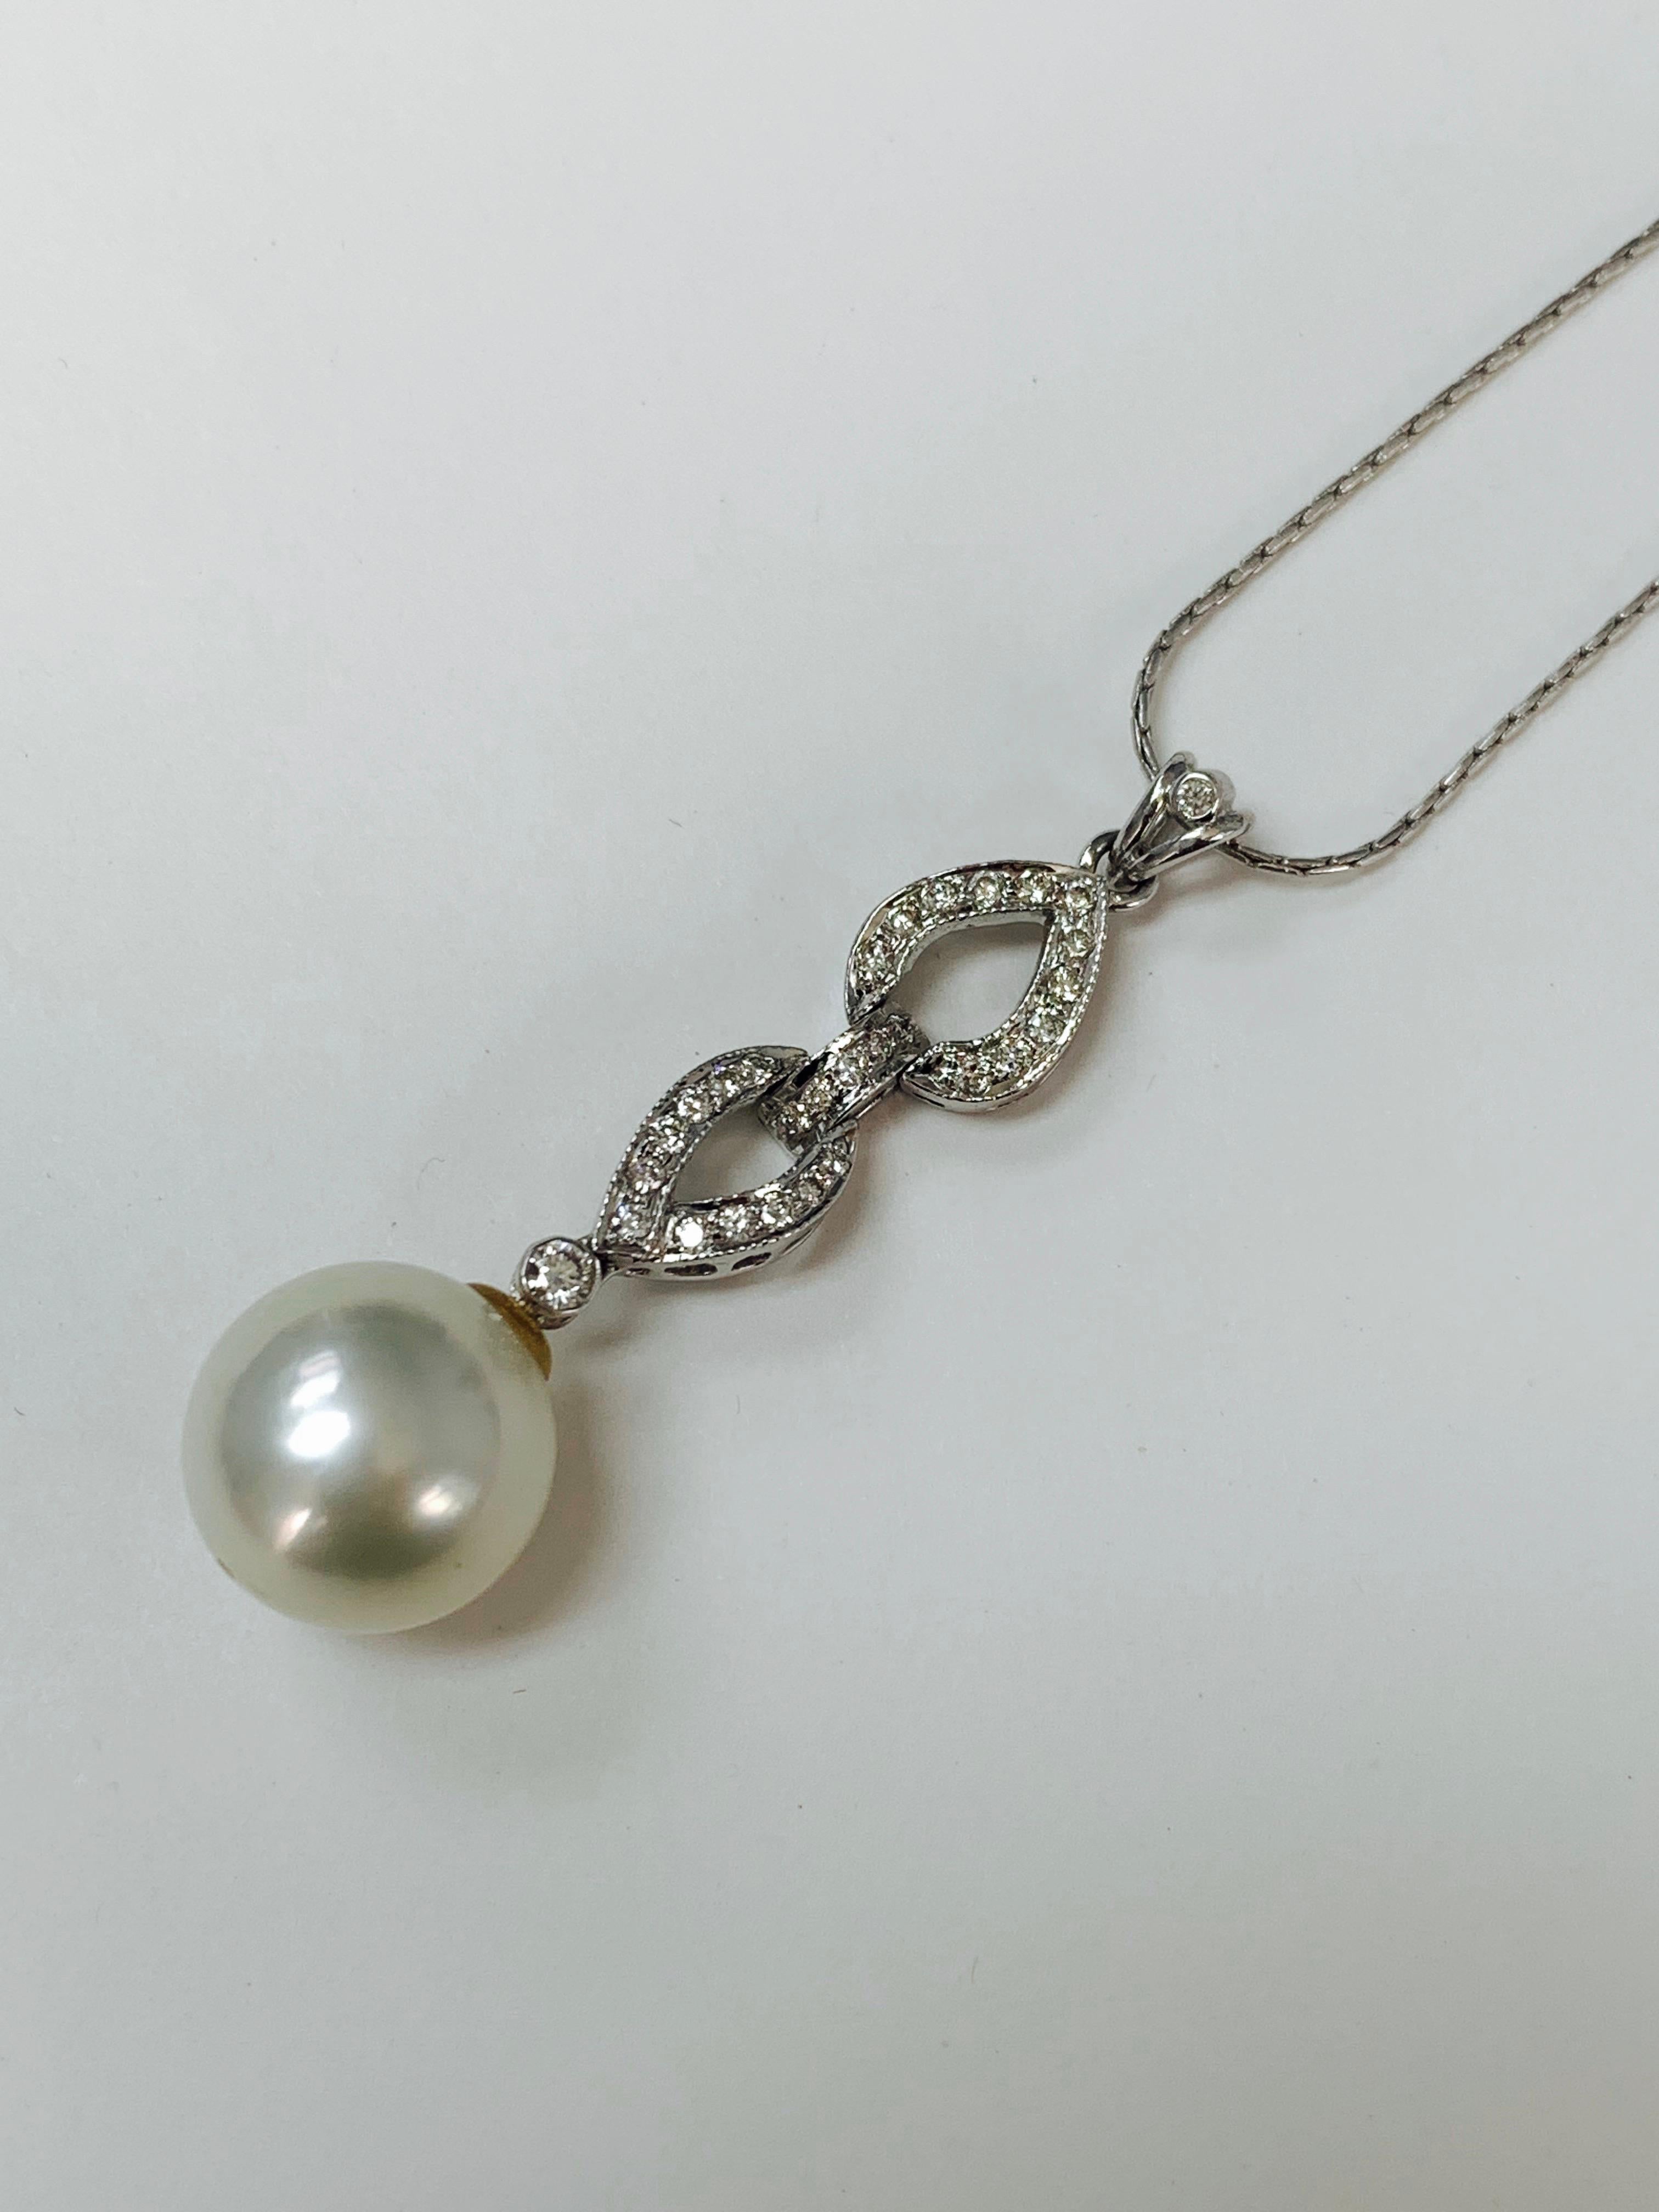 Very classy diamond and south sea pearl pendant In 18K white gold.
The details are as follows : 
Diamond  weight : 0.53 carat ( GH color and VS clarity ) 
South Sea Pearl : 12.4mm 
Measurements : 1 3/4 inches 
Metal : 18k white gold 